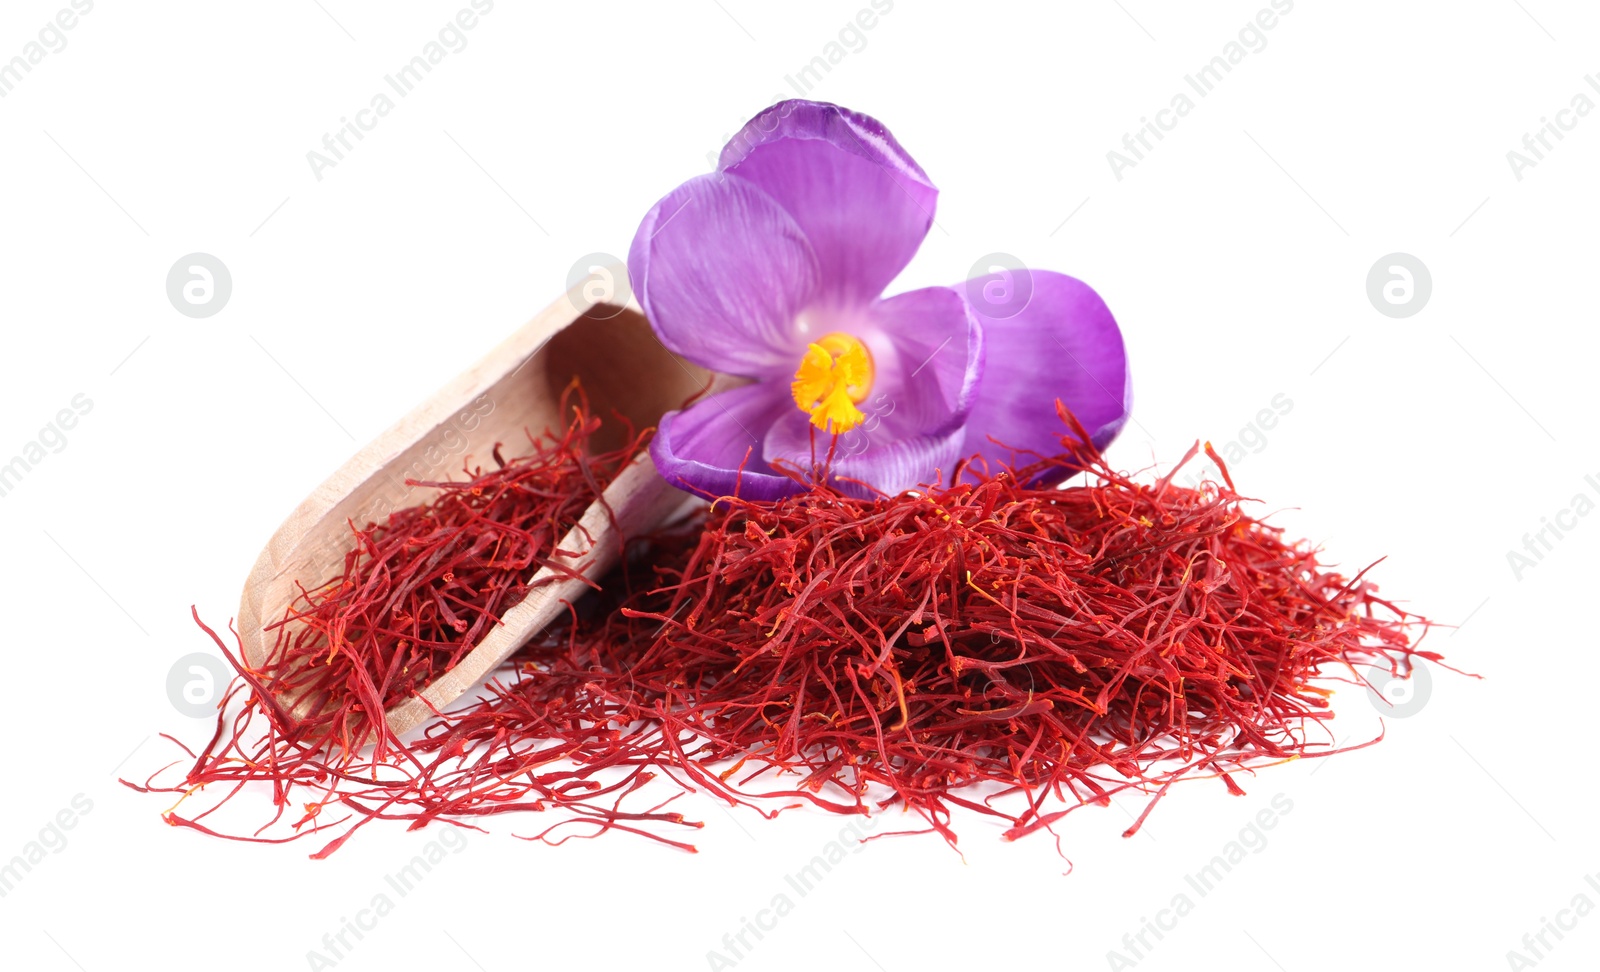 Photo of Pile of dried saffron, crocus flower and wooden scoop on white background